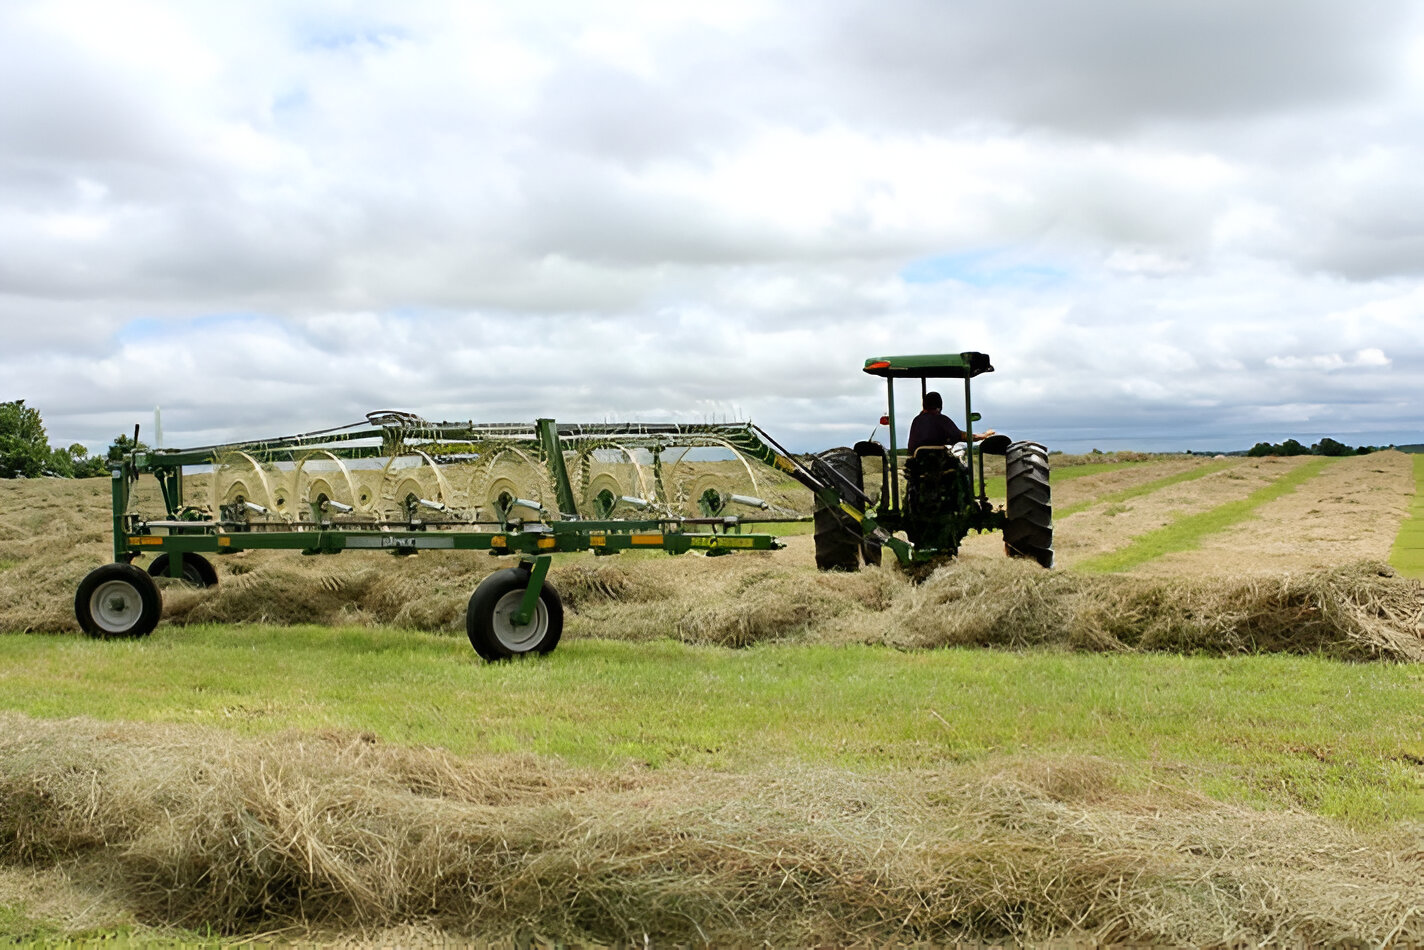 This time of year, pop-up showers and storms are a risk to hay that has been mowed but not yet baled. Keep an eye on weather forecasts and understand how different types of rainfall affect cut hay, says MU Extension agronomist Hunter Lovewell. (Photo by Linda Geist.)